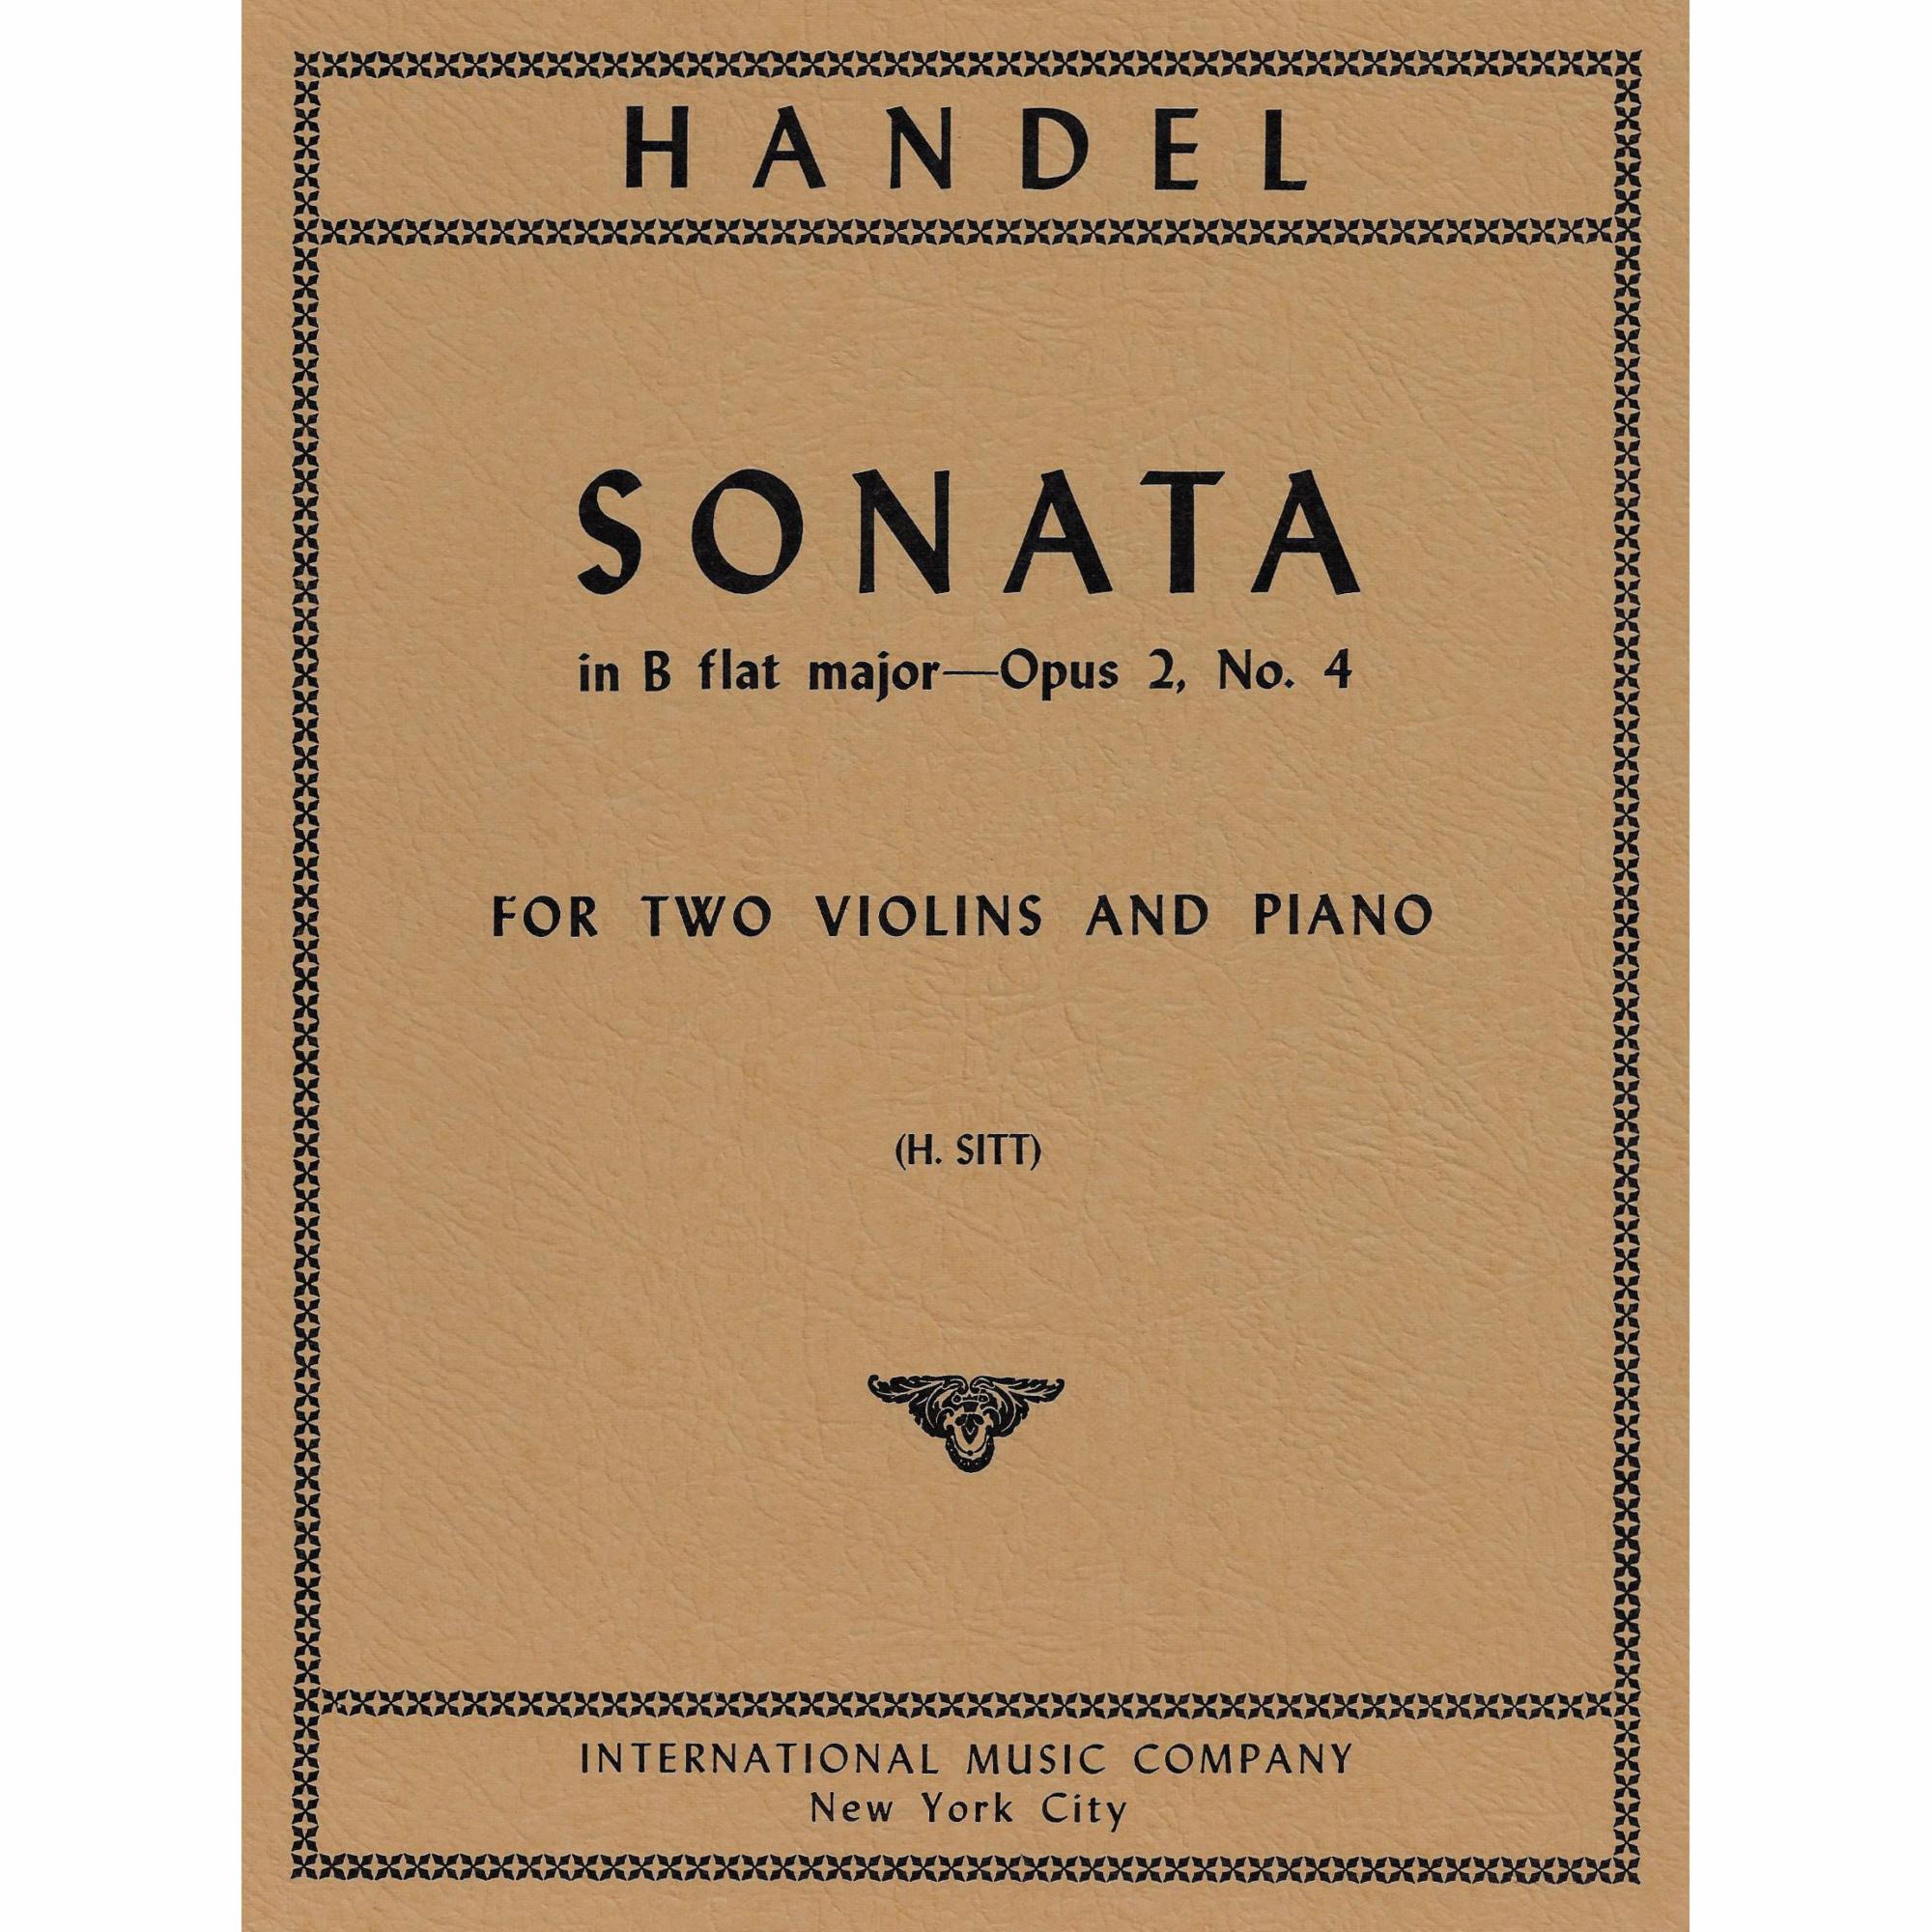 Handel -- Sonata in B-flat Major, Op. 2, No. 4 for Two Violins and Piano